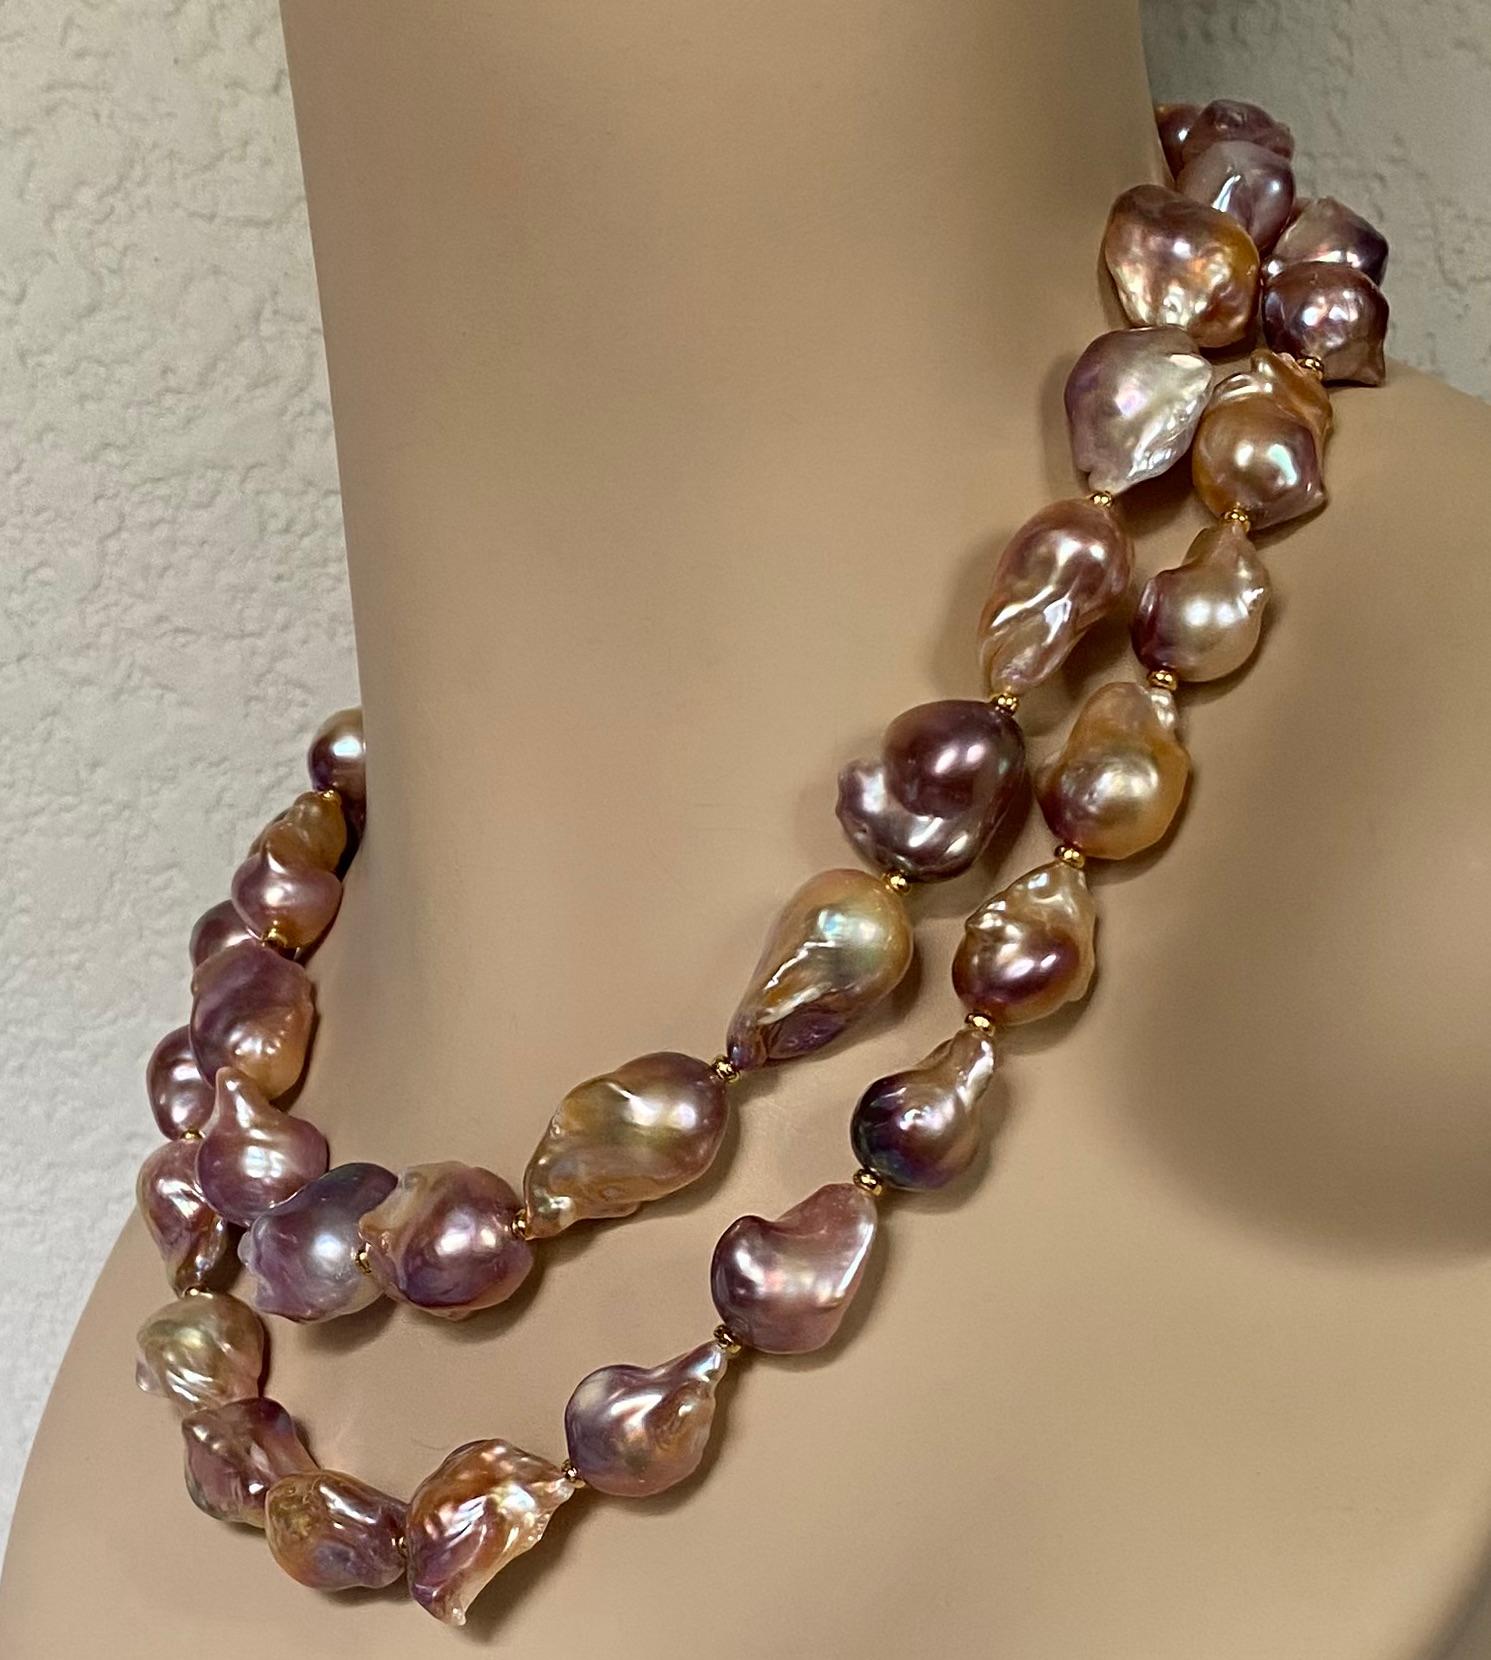 Baroque pearls are strung into a dramatic double strand necklace.  The pearls (origin: China) are known as 